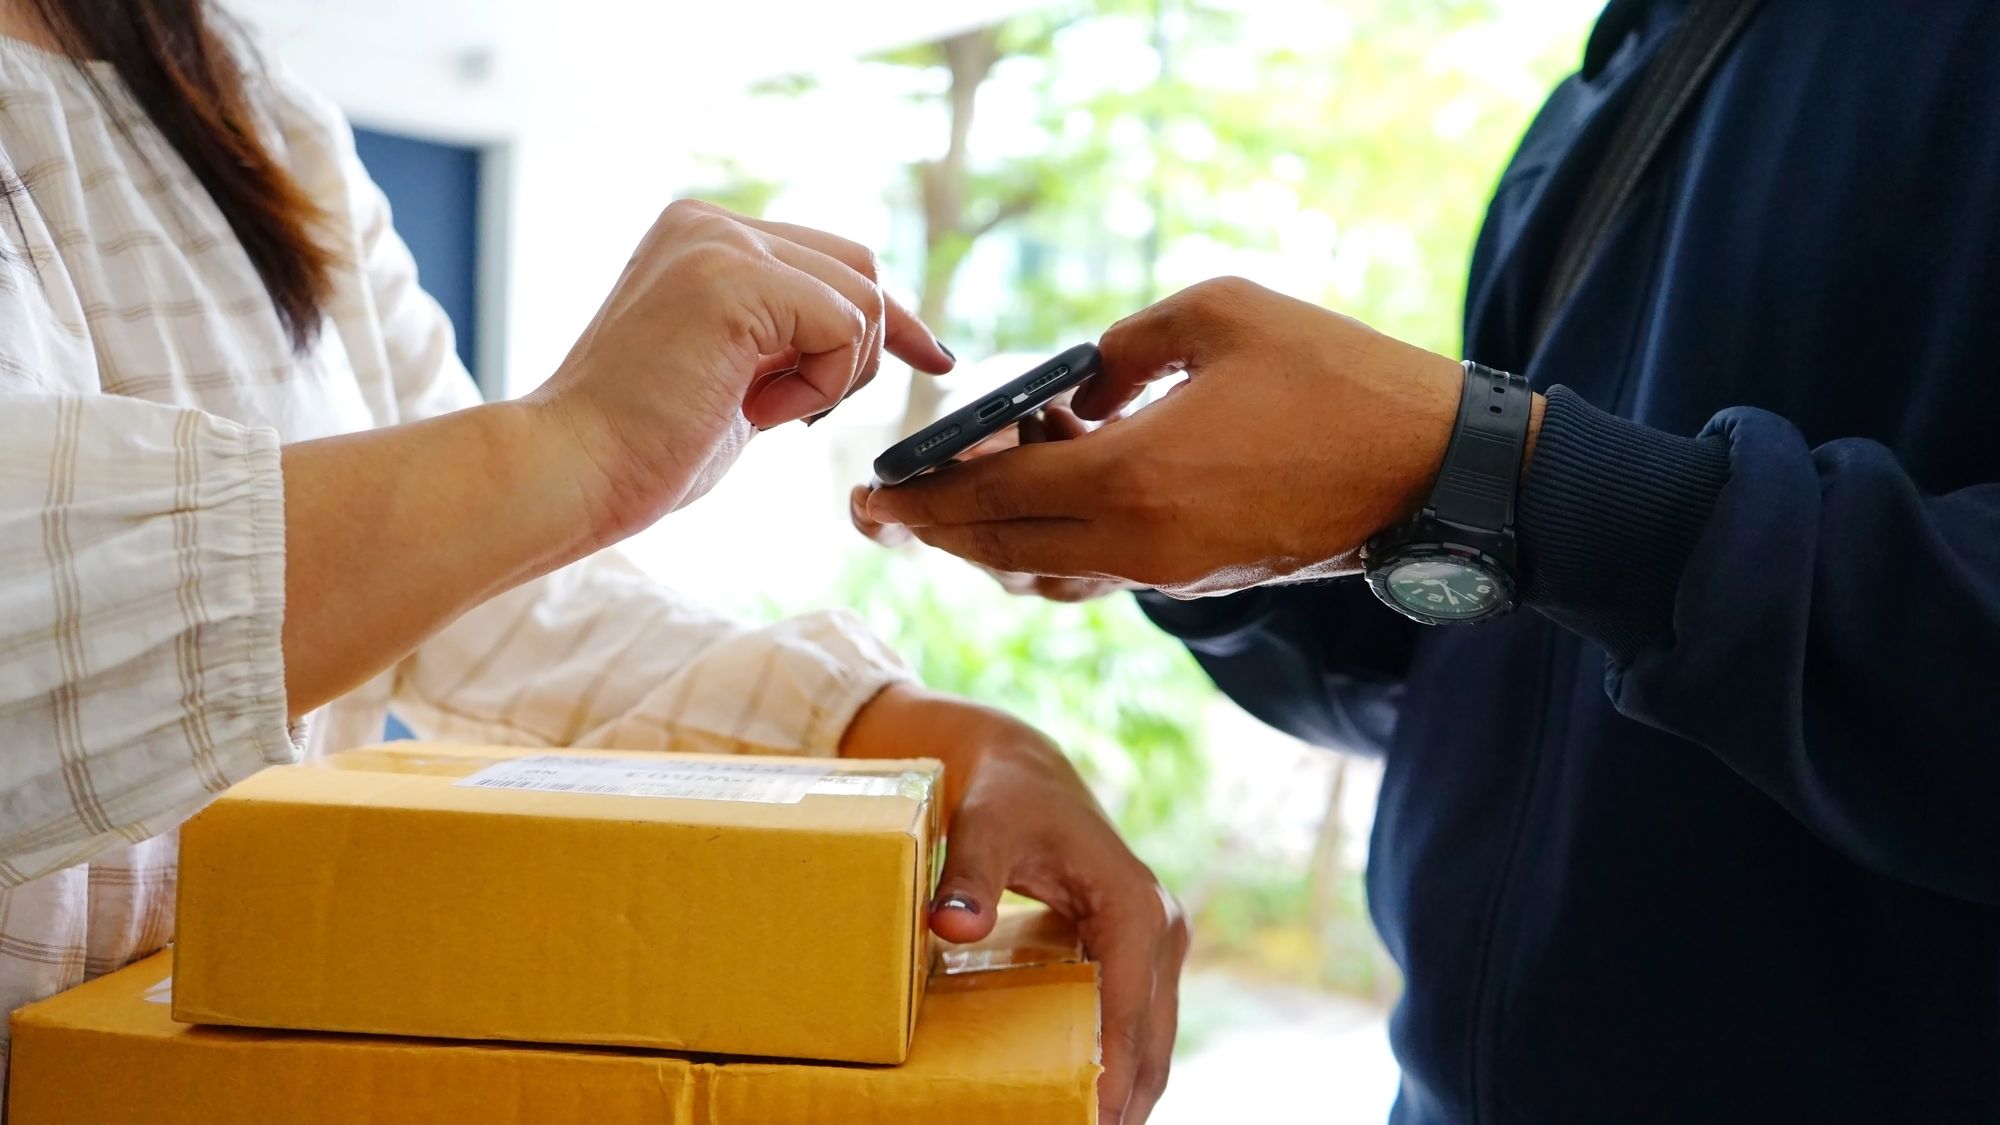 A woman signing on a smartphone as proof of delivery for 2 delivered packages